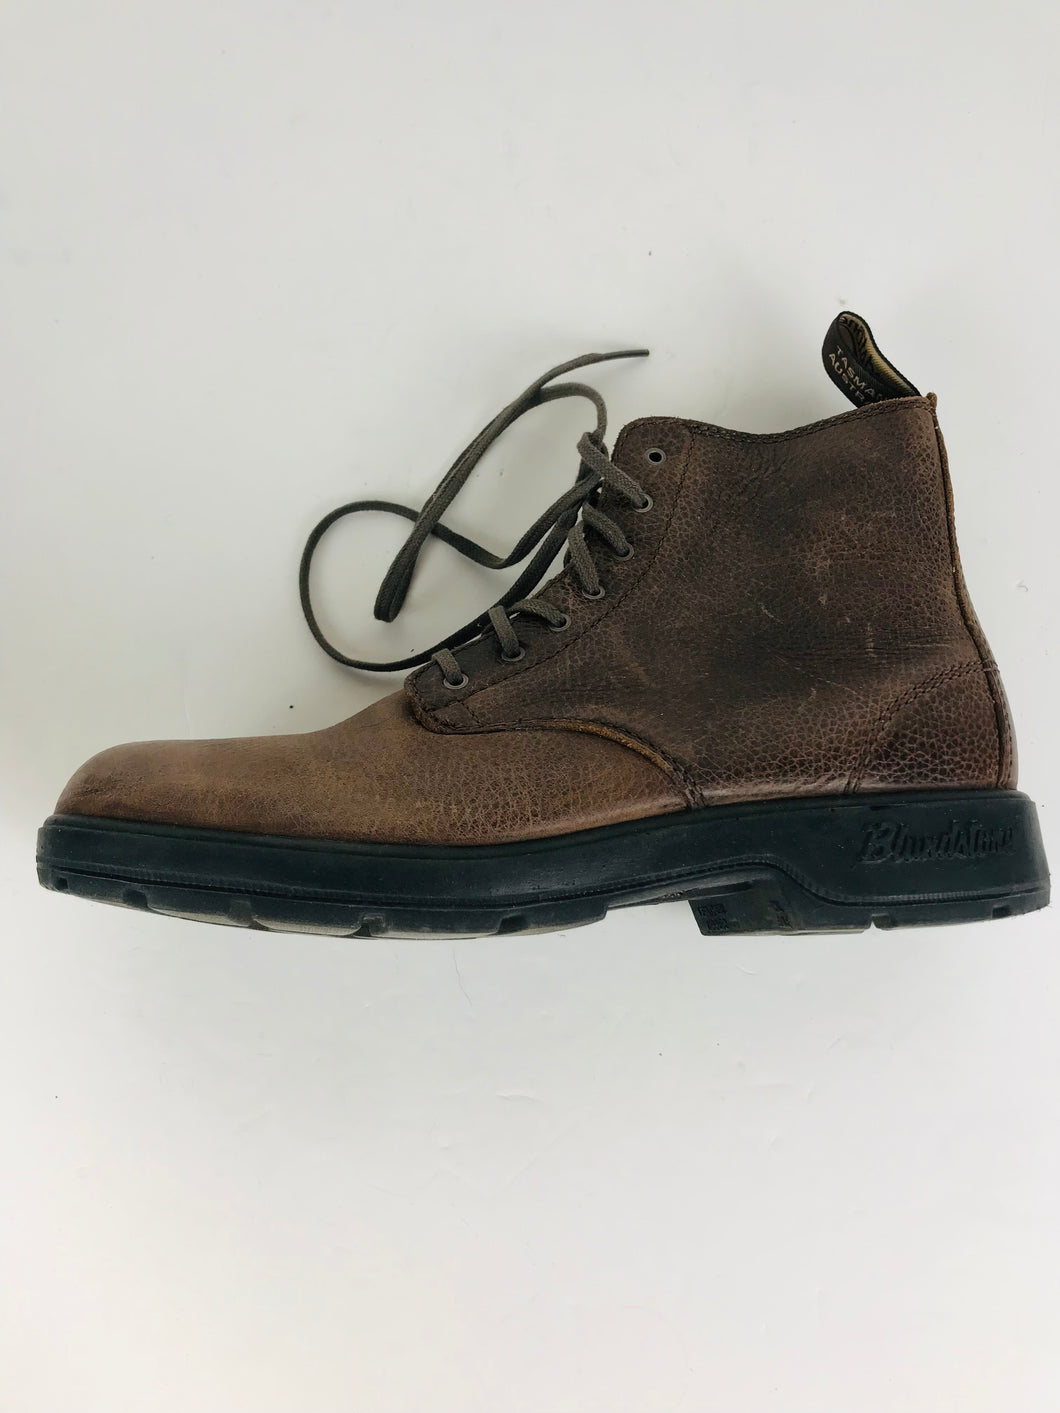 Blundstone Men's Leather Work Boots | AU/UK7 | Brown